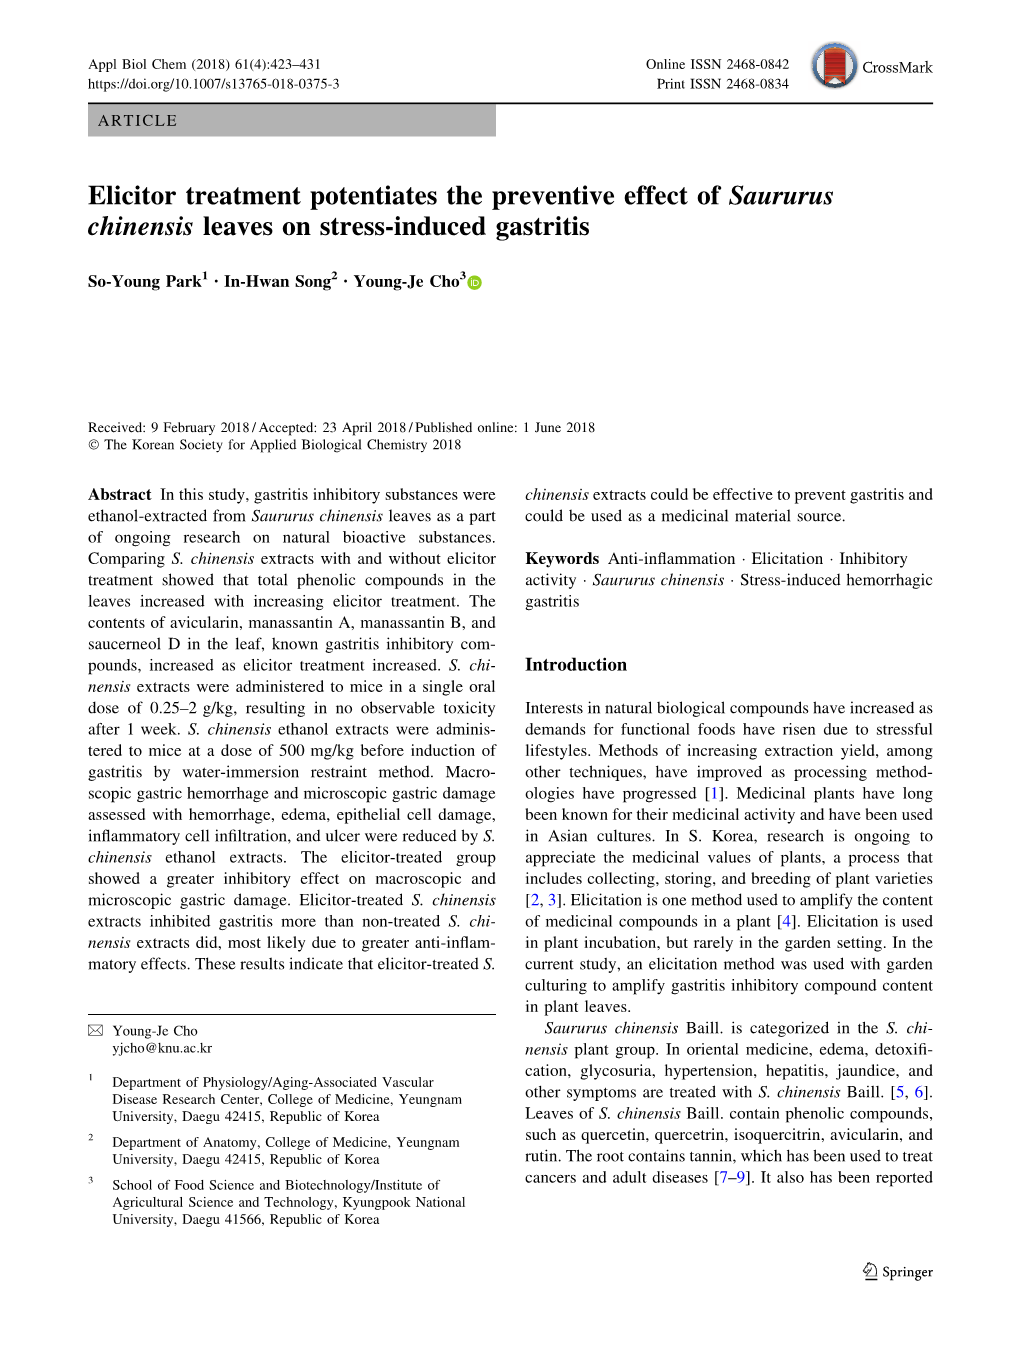 Elicitor Treatment Potentiates the Preventive Effect of Saururus Chinensis Leaves on Stress-Induced Gastritis